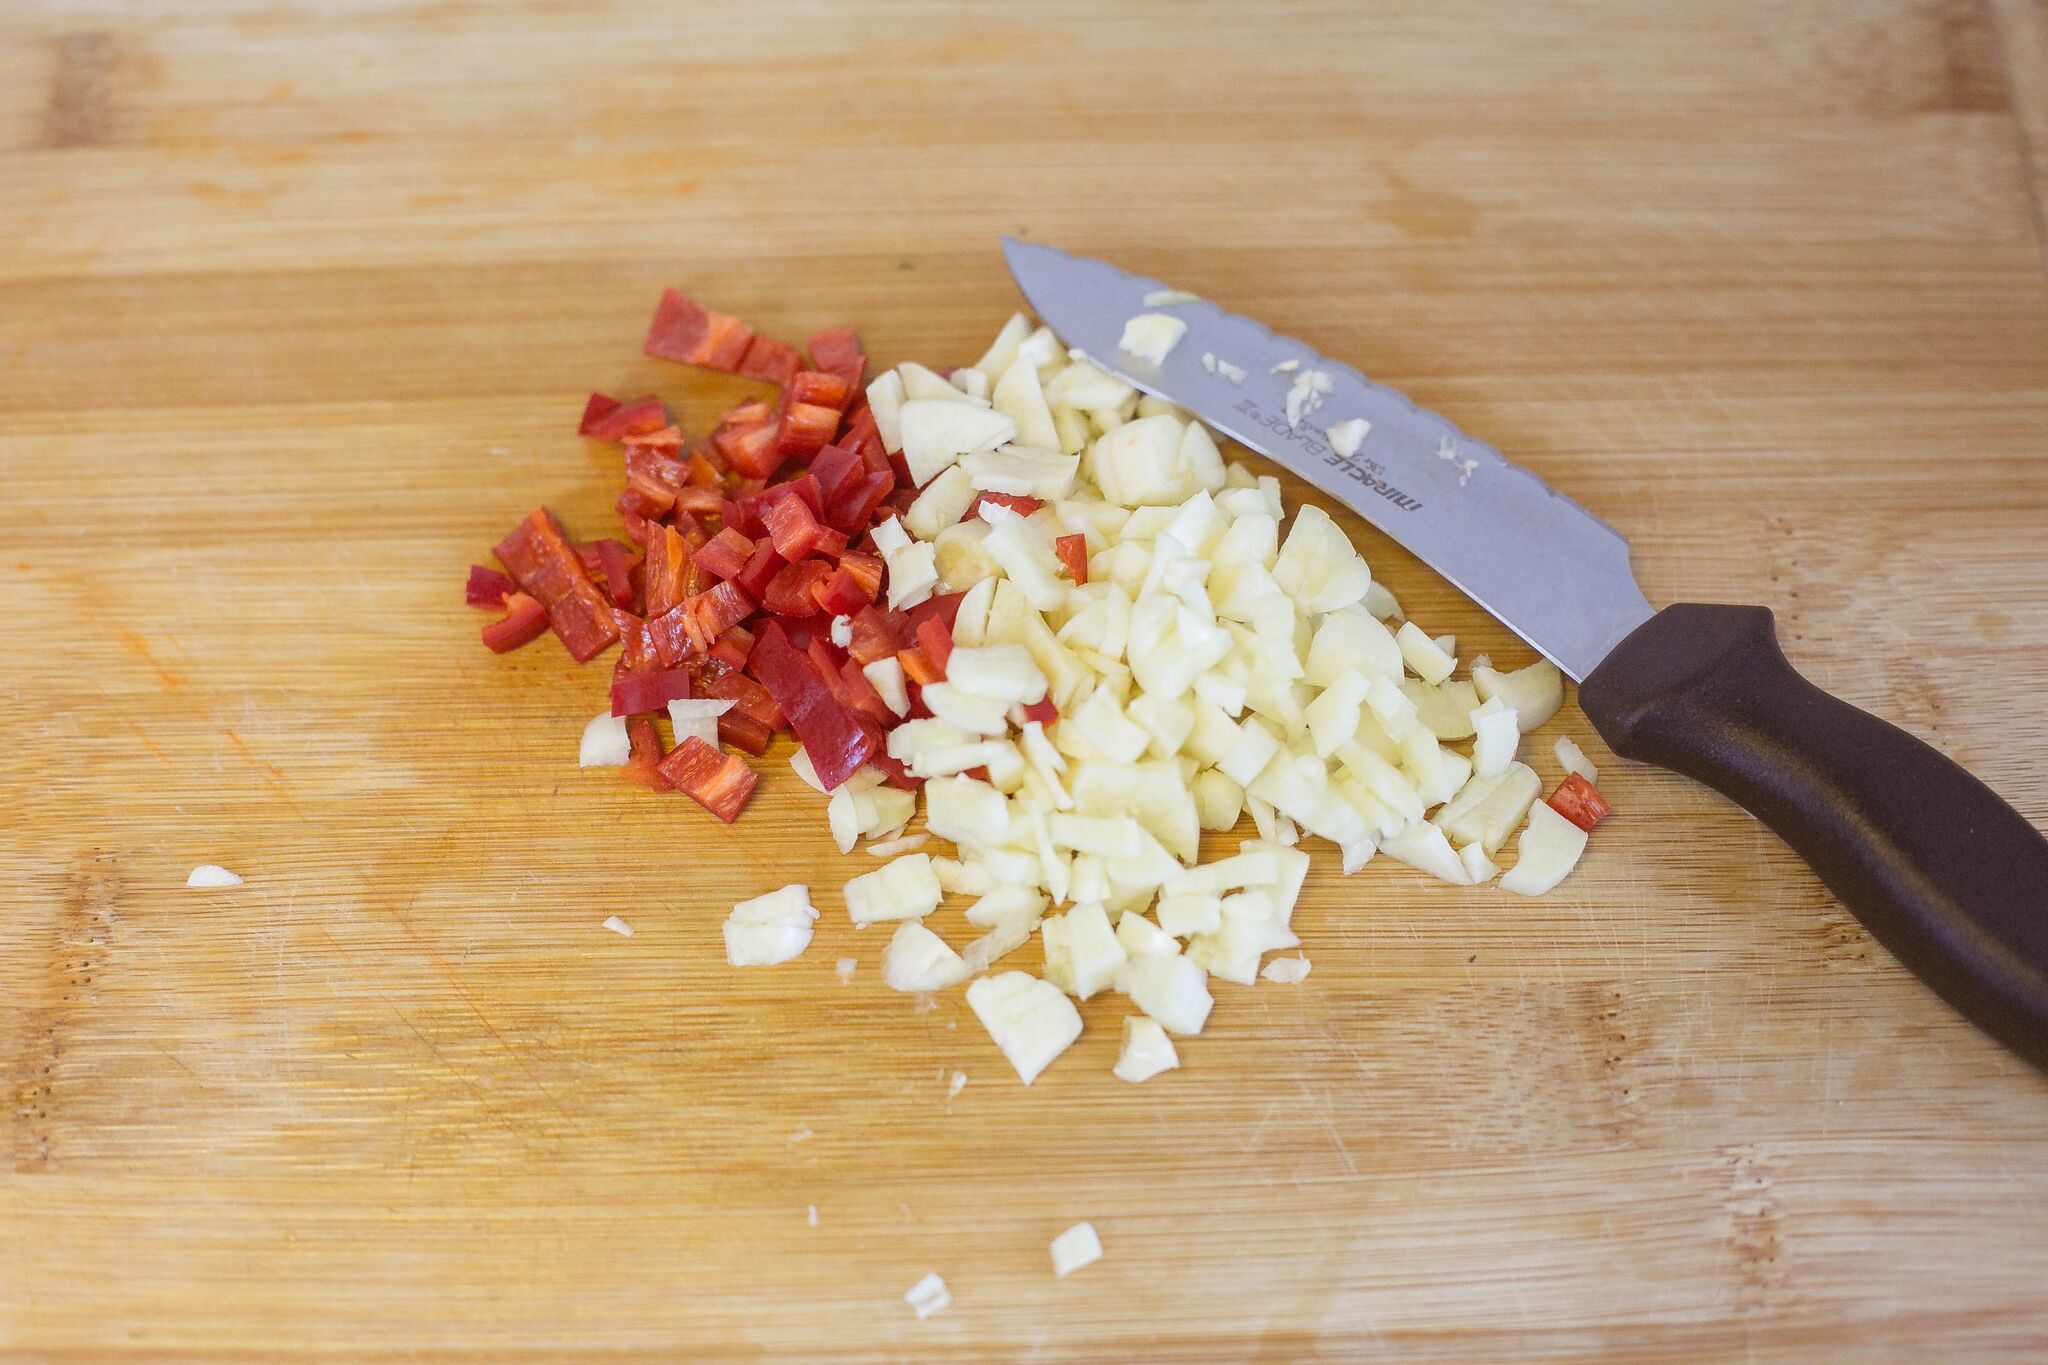 Cut the chili pepper and mince the garlic.